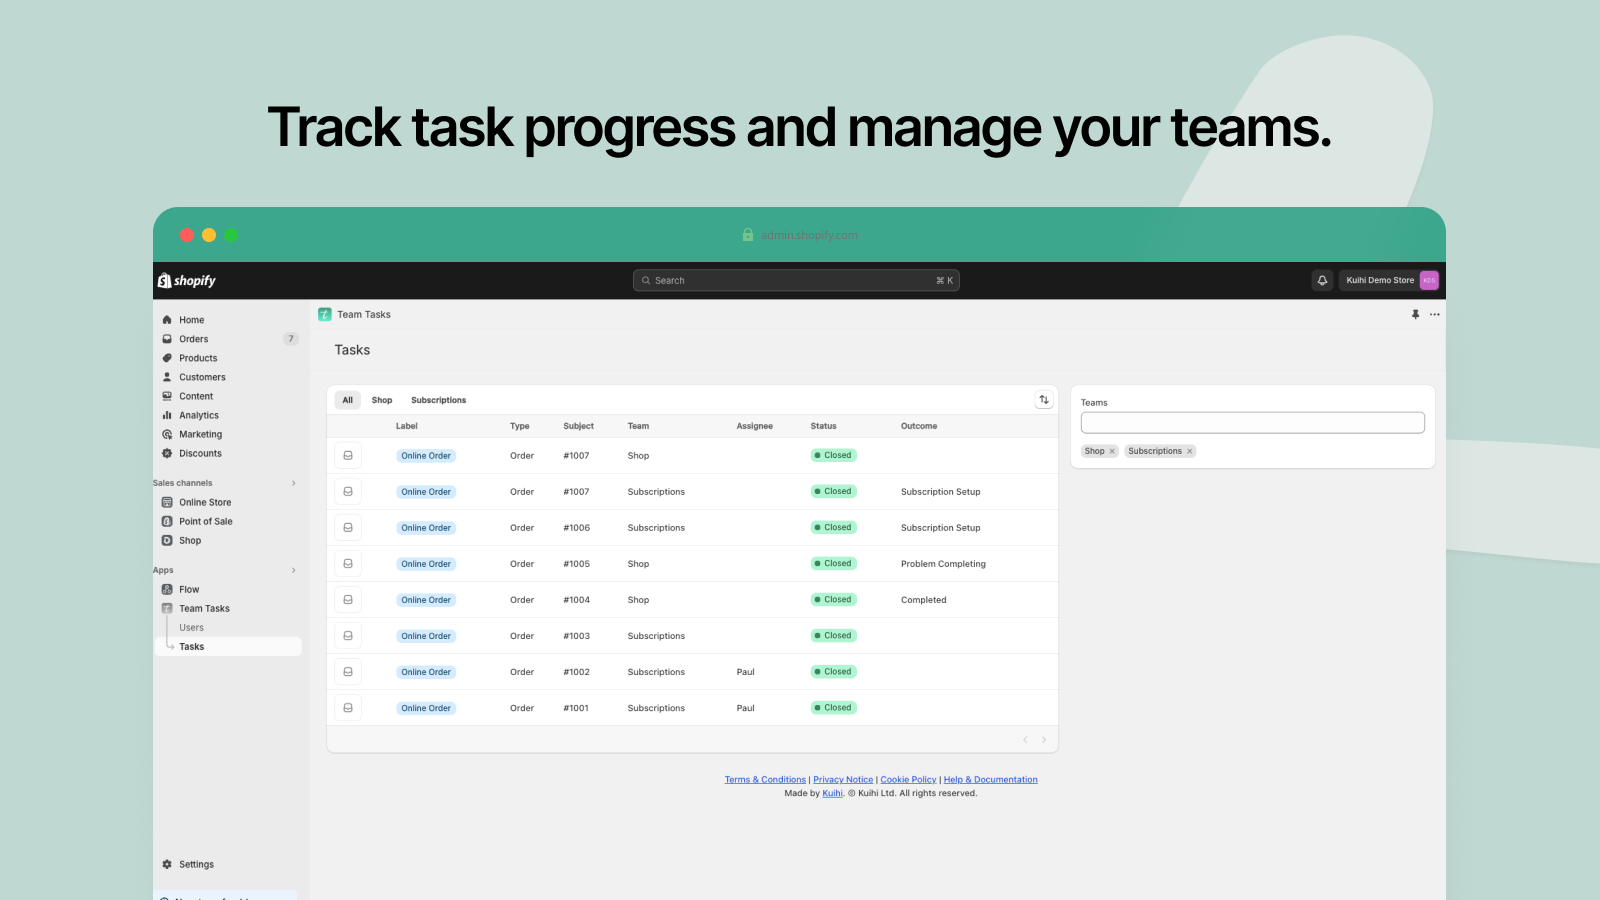 Track task progress and manage your teams